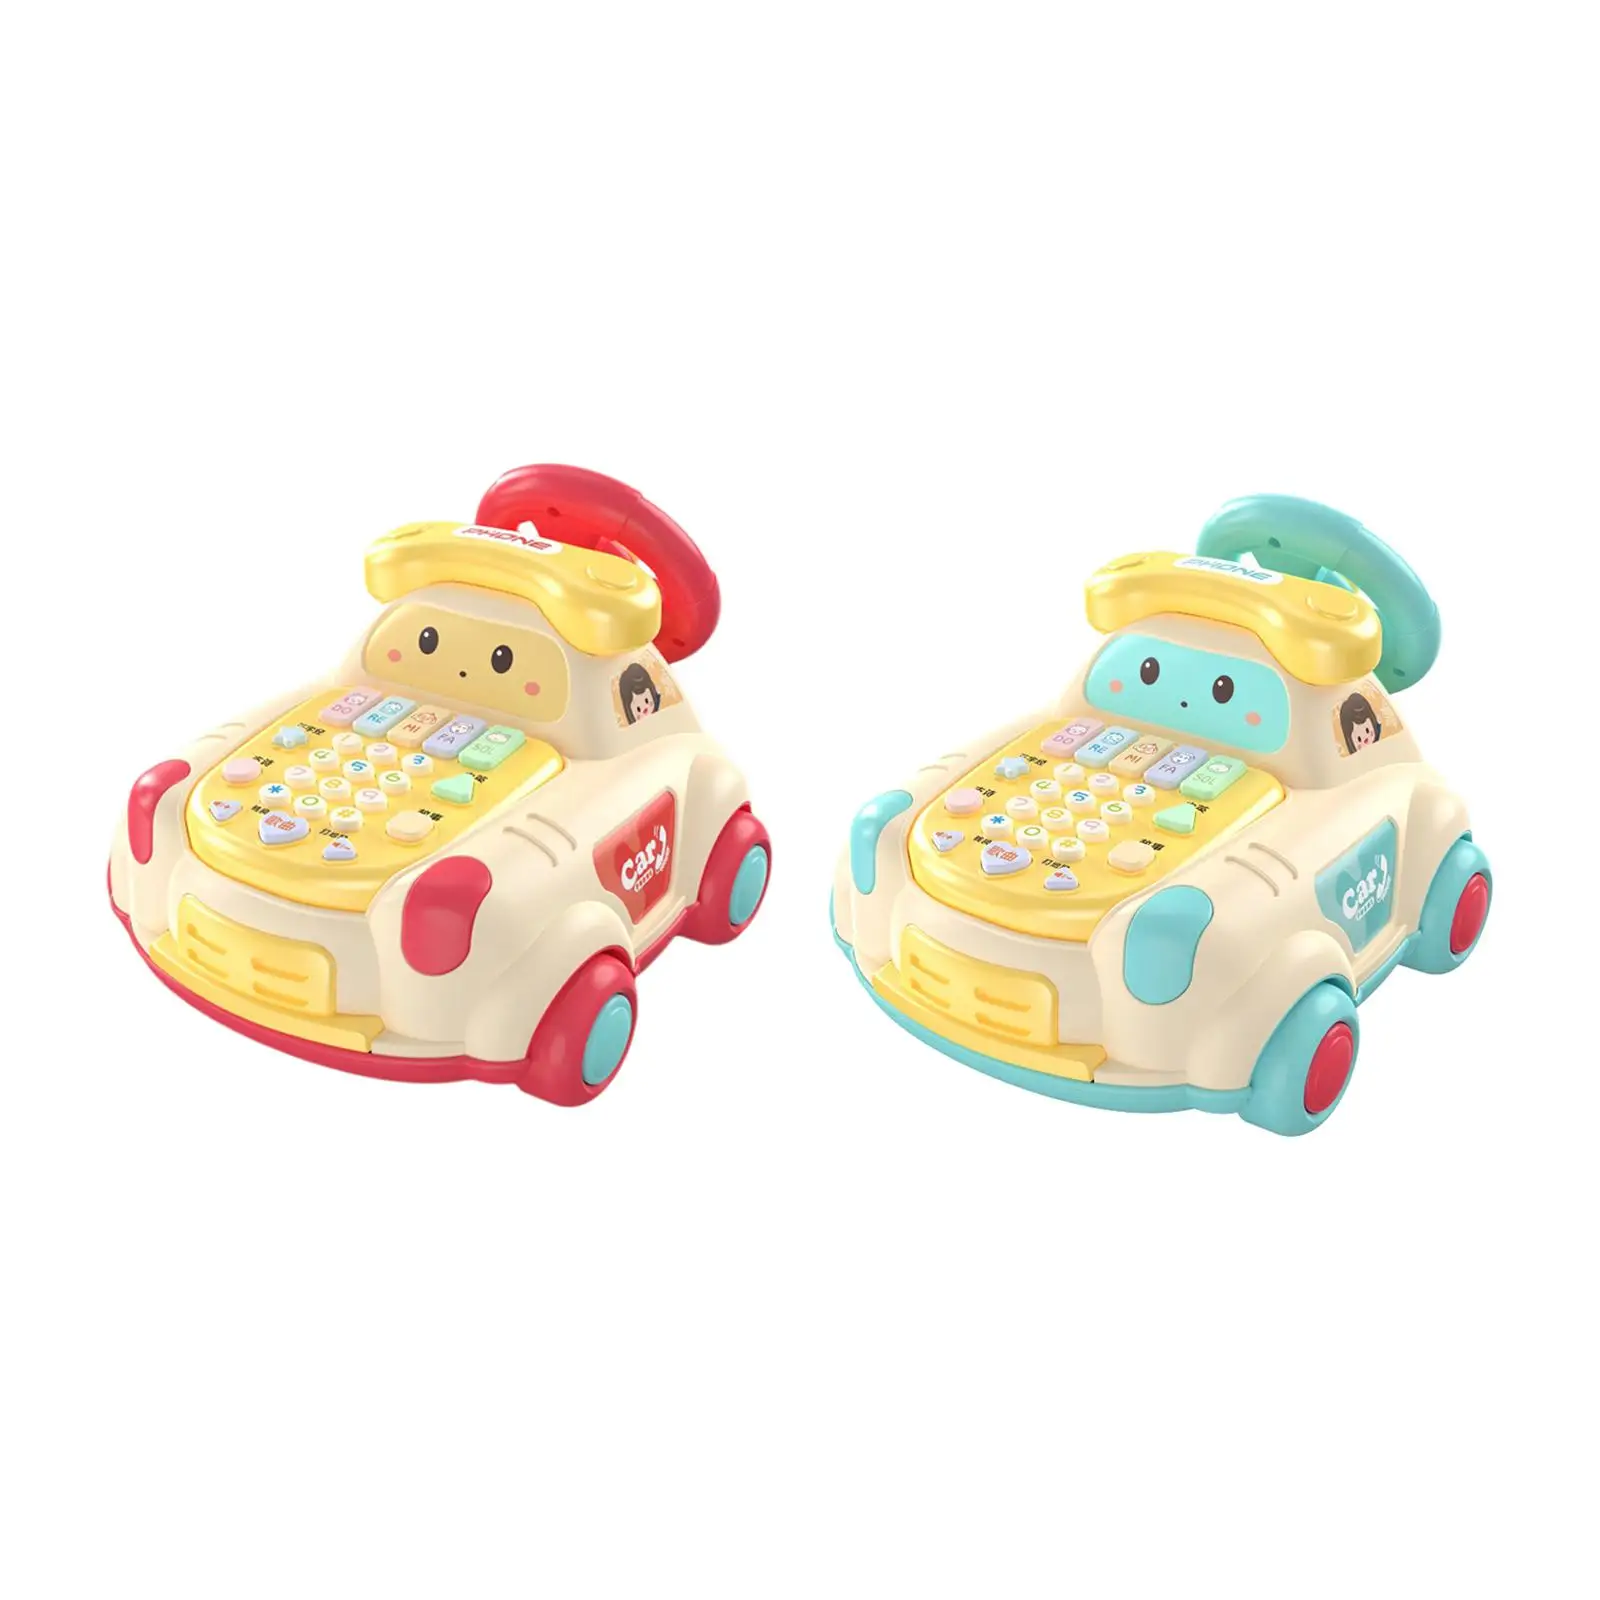 Baby Telephone Toy Movable Fine Motor Skills Educational Children Phone Toy for Game Interaction Activity Education Development